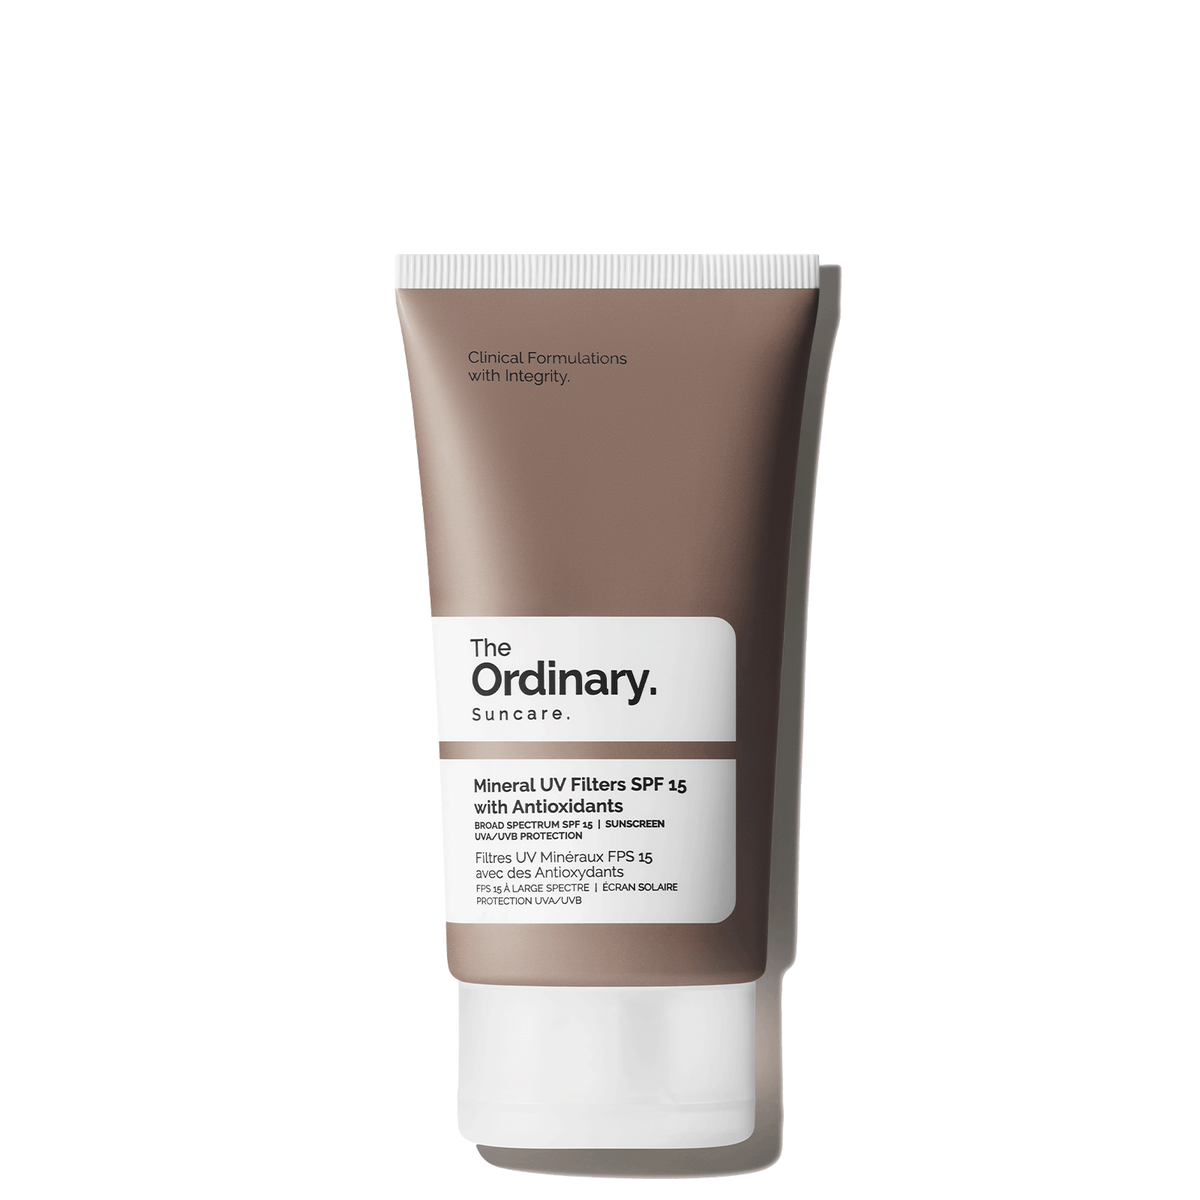 THE ORDINARY Mineral UV Filters SPF 15 with Antioxidants - Parafam